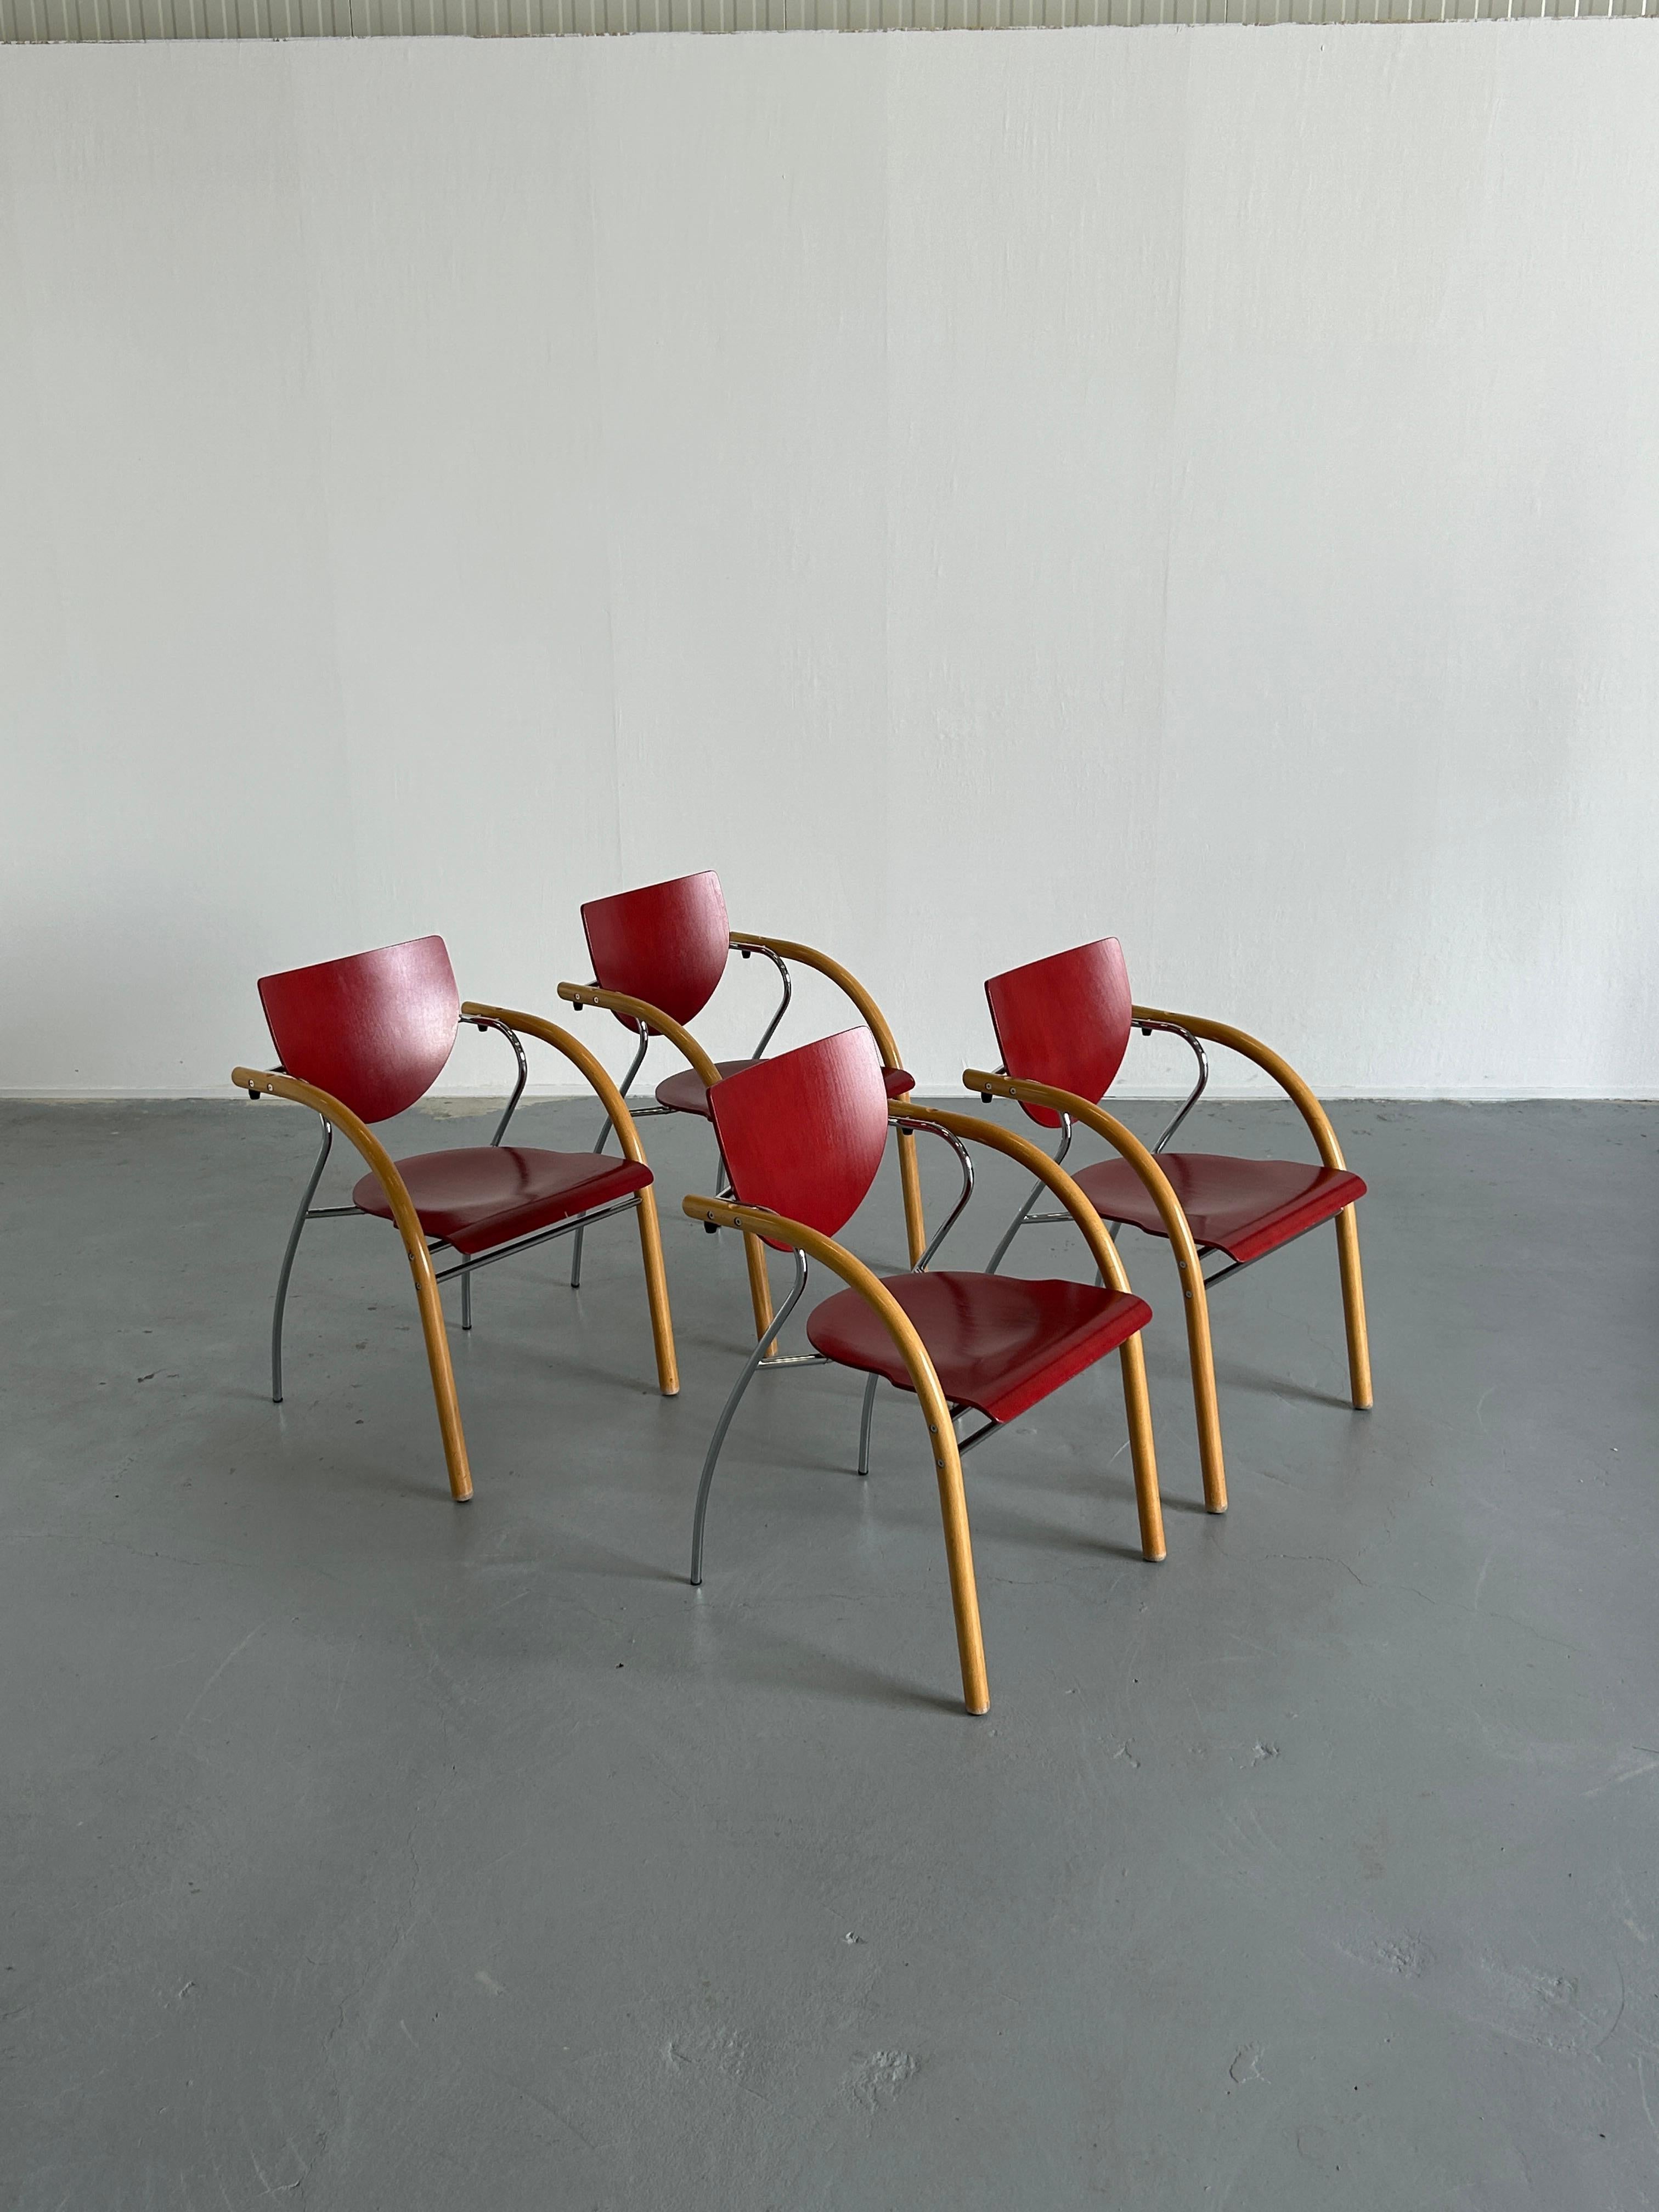 Set of four postmodern Memphis era, original Thonet dining chairs. Sculptural, geometrically shaped colourful structure.

Produced by Thonet Vienna during the 1990s.
Signed.

Price is for the set of four pieces.

Quality made and in good